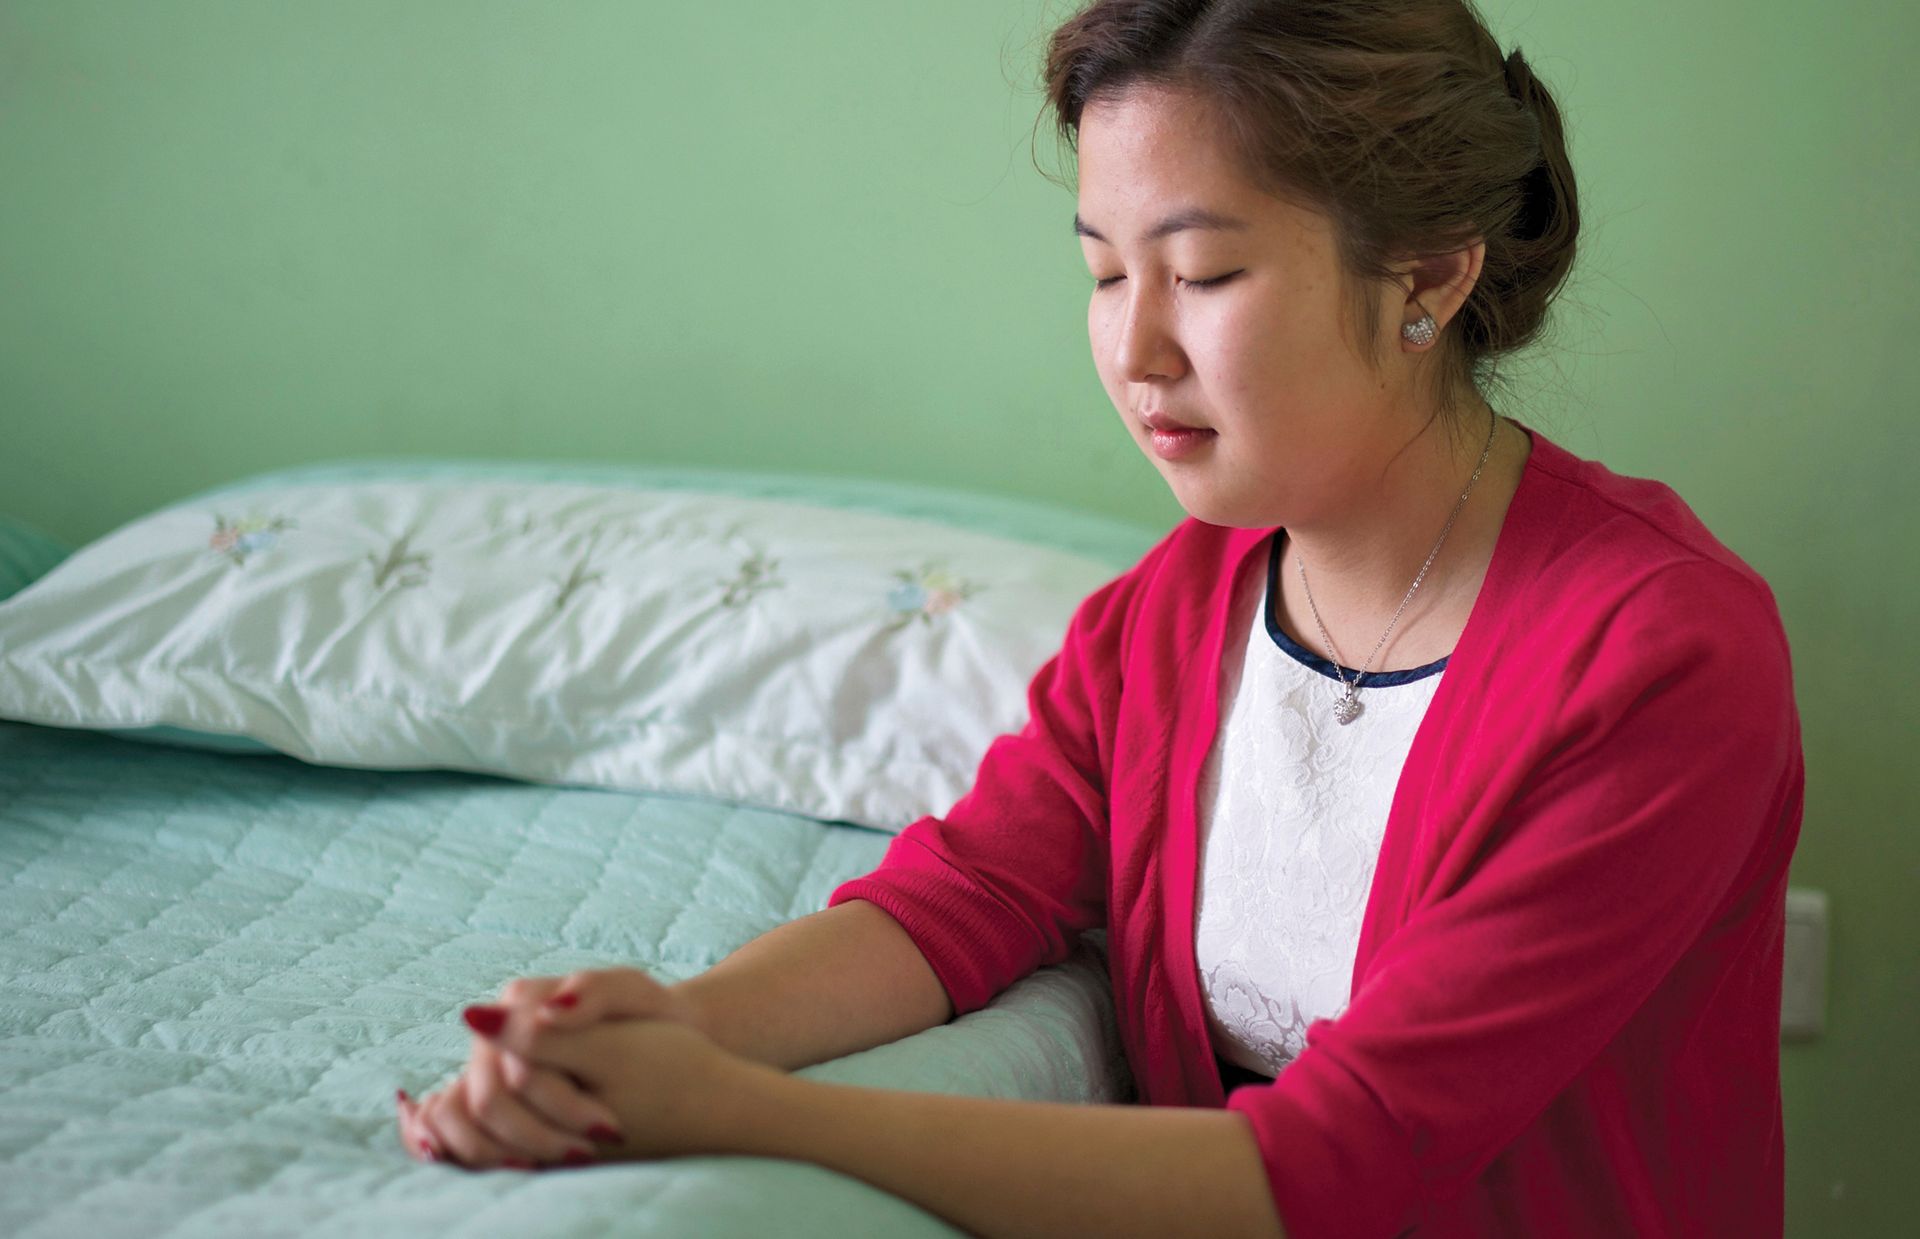 A young woman from Mongolia kneels by her bed, closes her eyes, and prays.